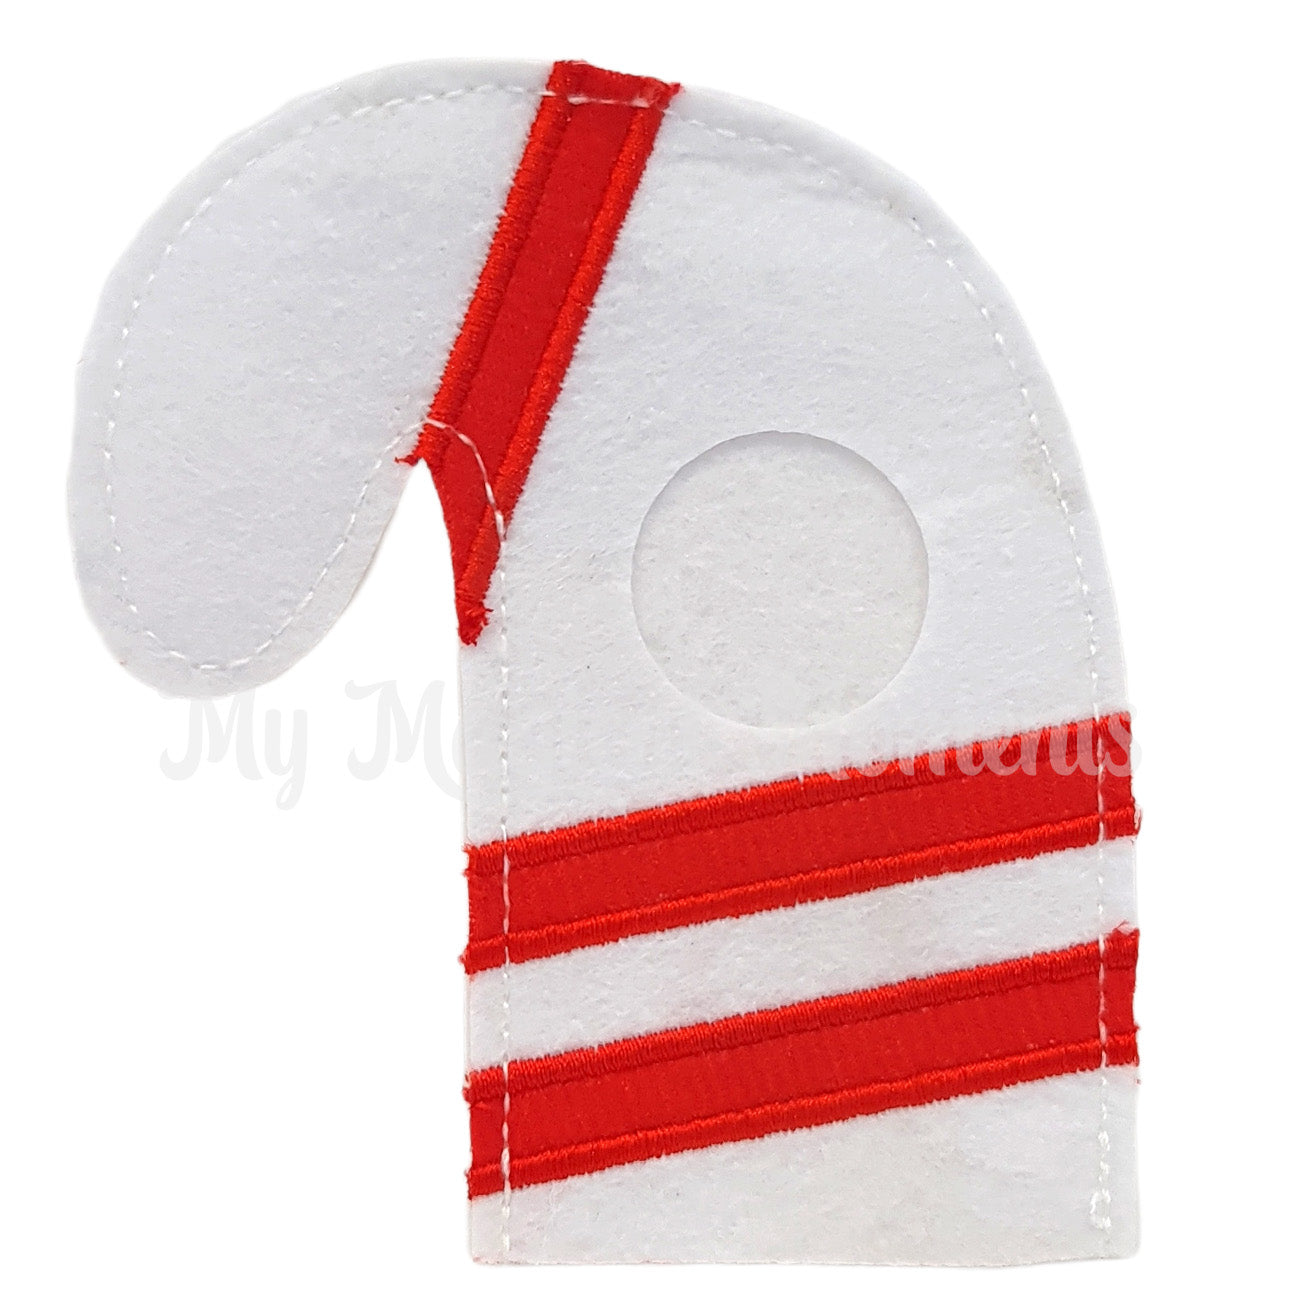 Elf baby candy cane costume